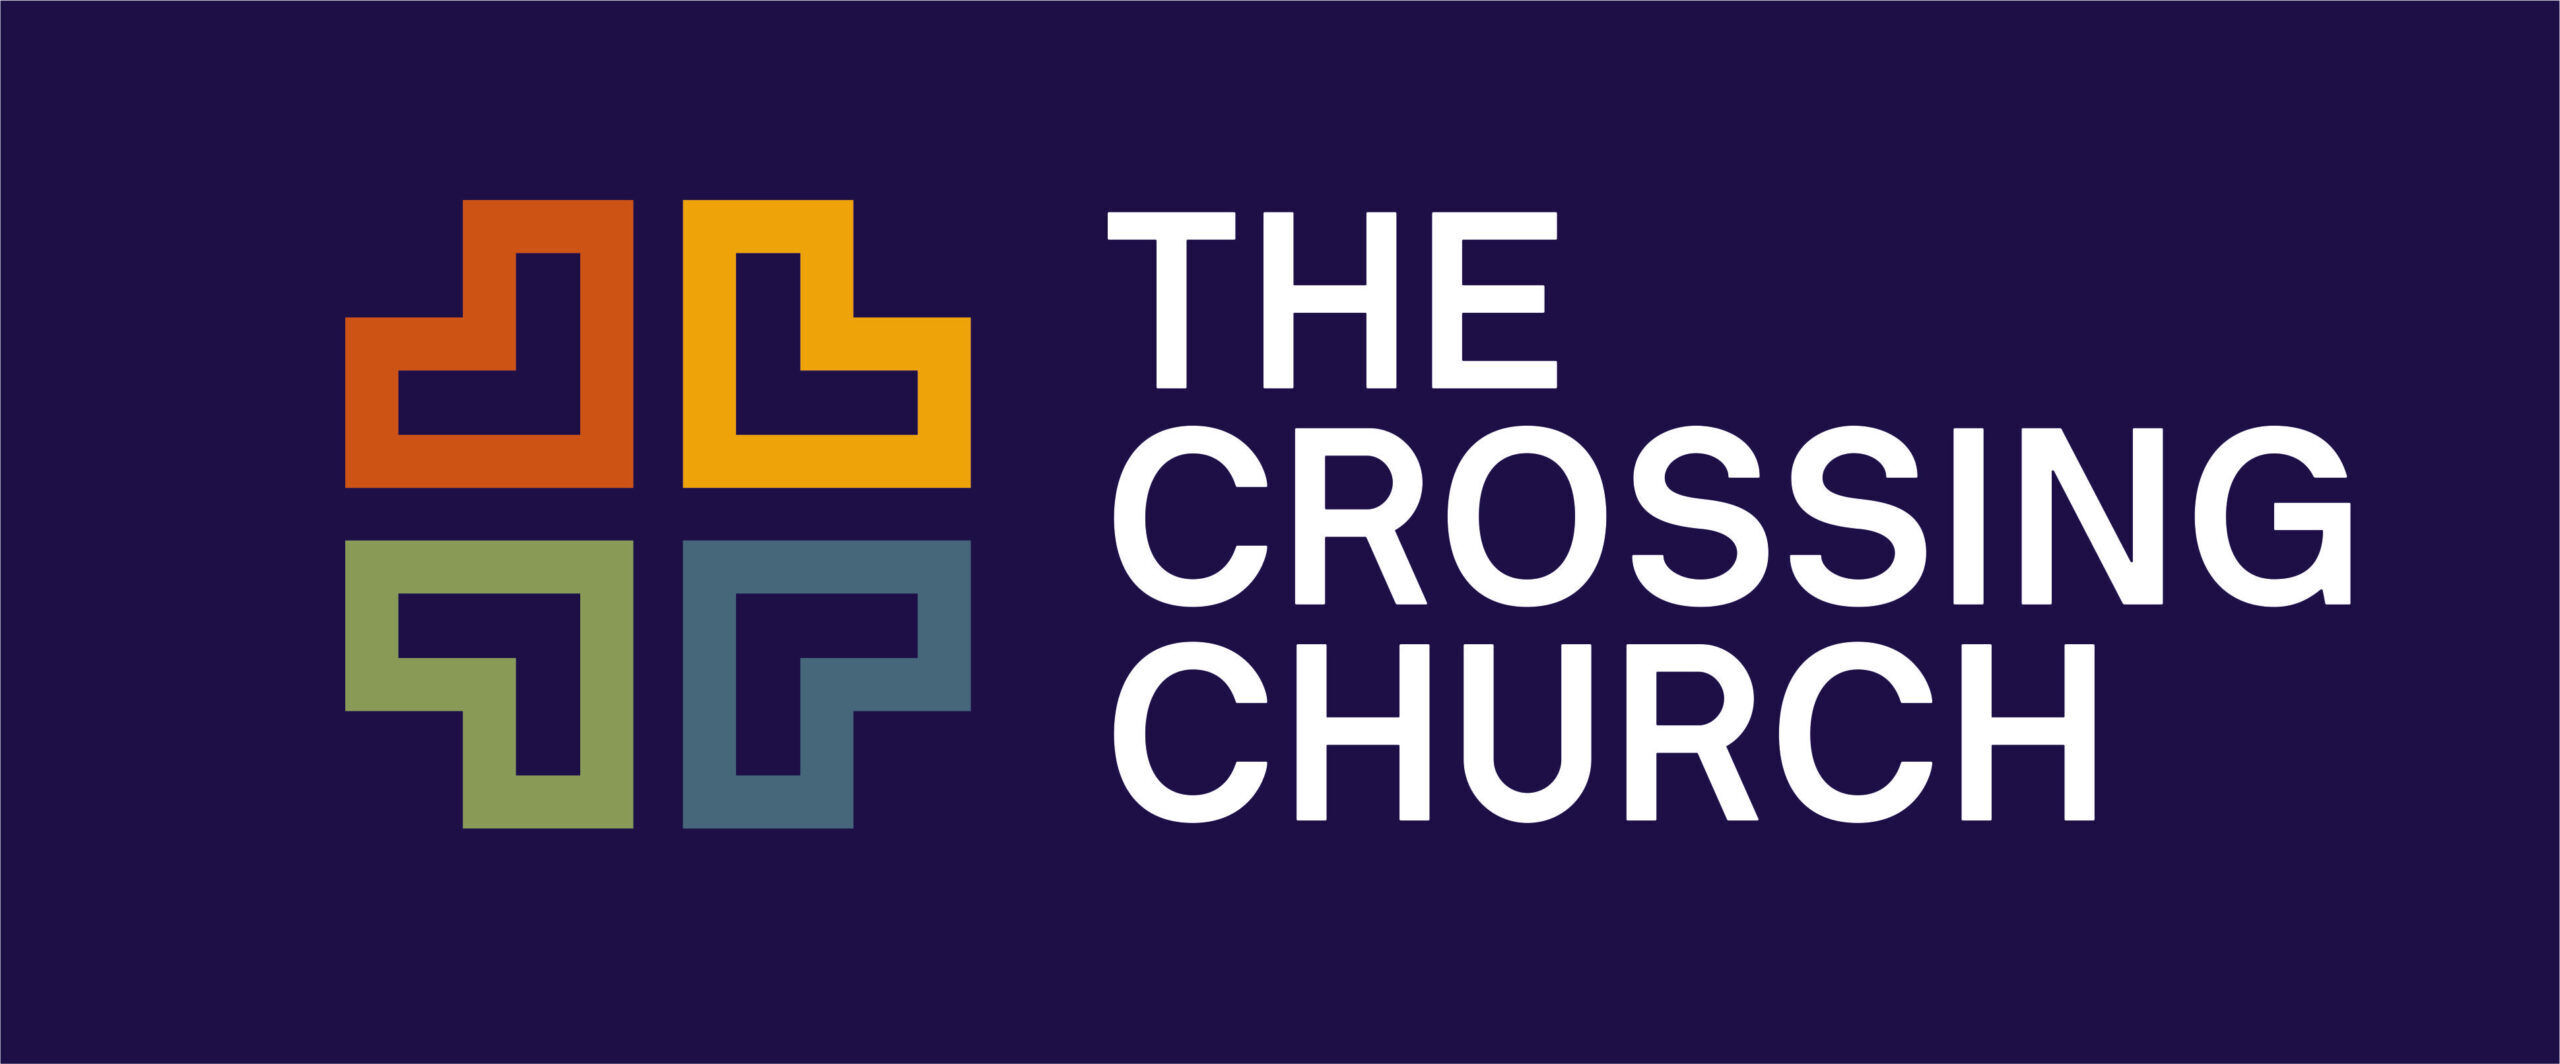 The Crossing Church – Clermont, FL